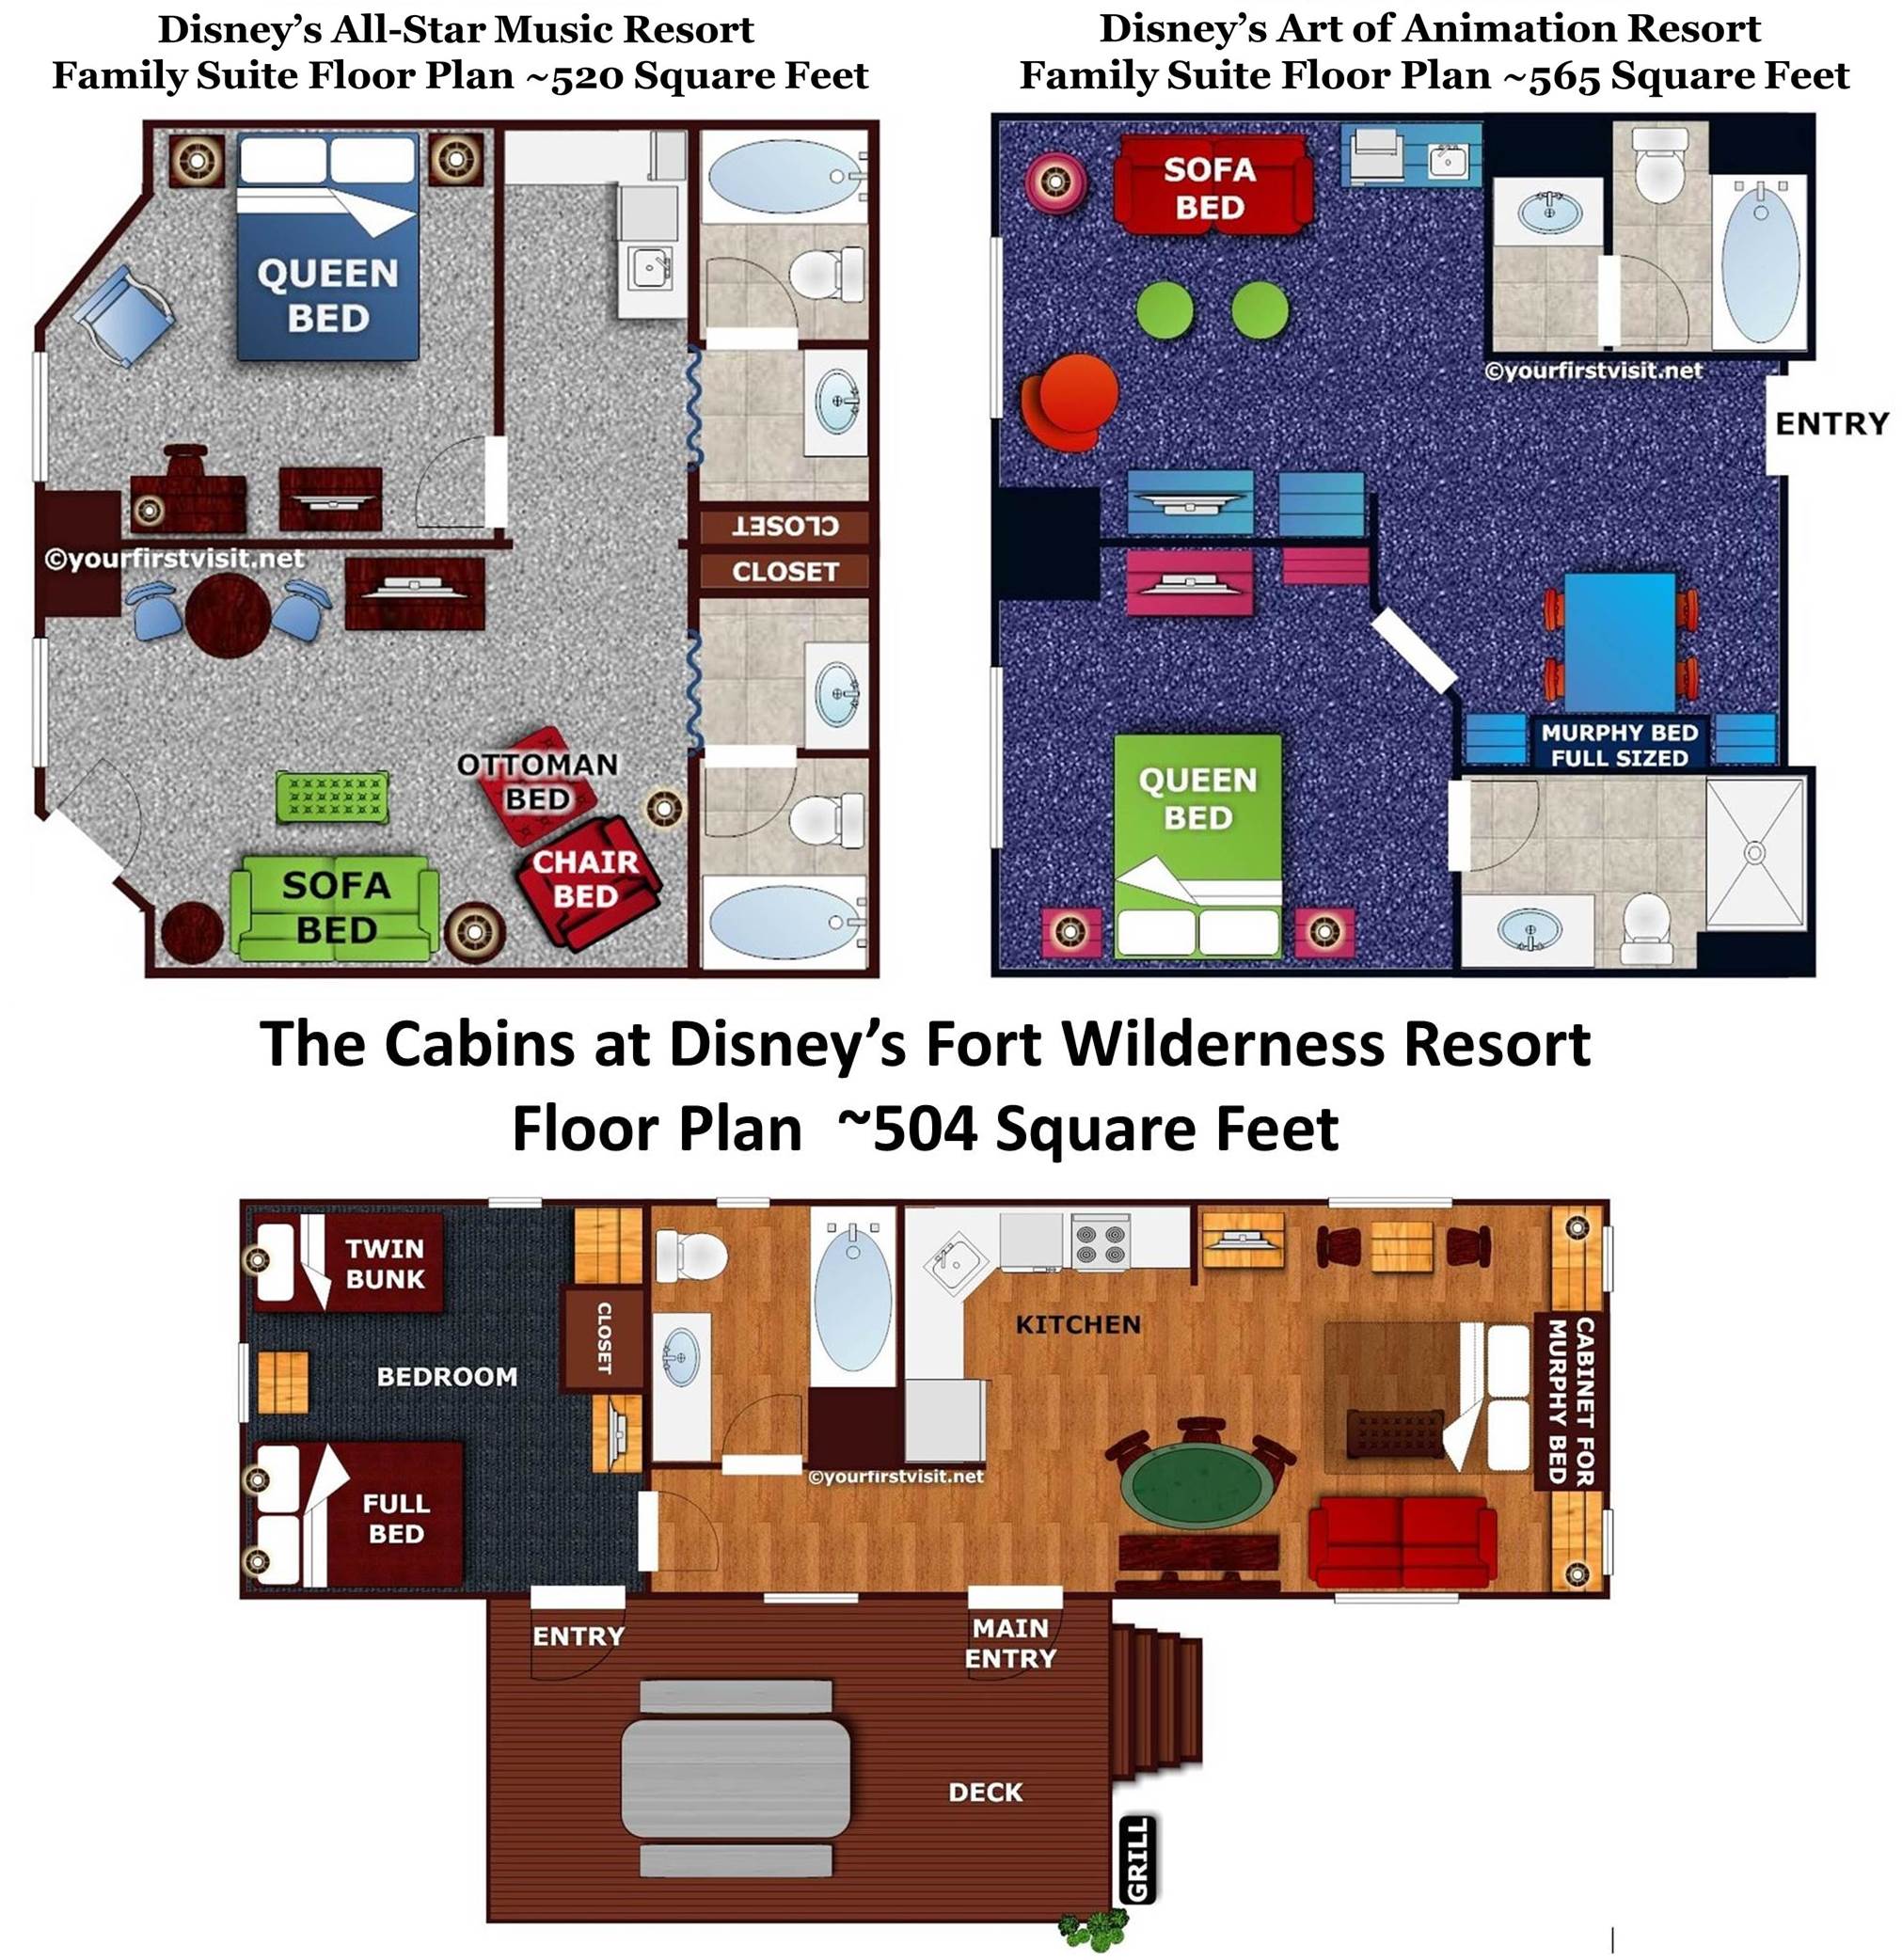 Review The Family Suites at Disney's AllStar Music Resort